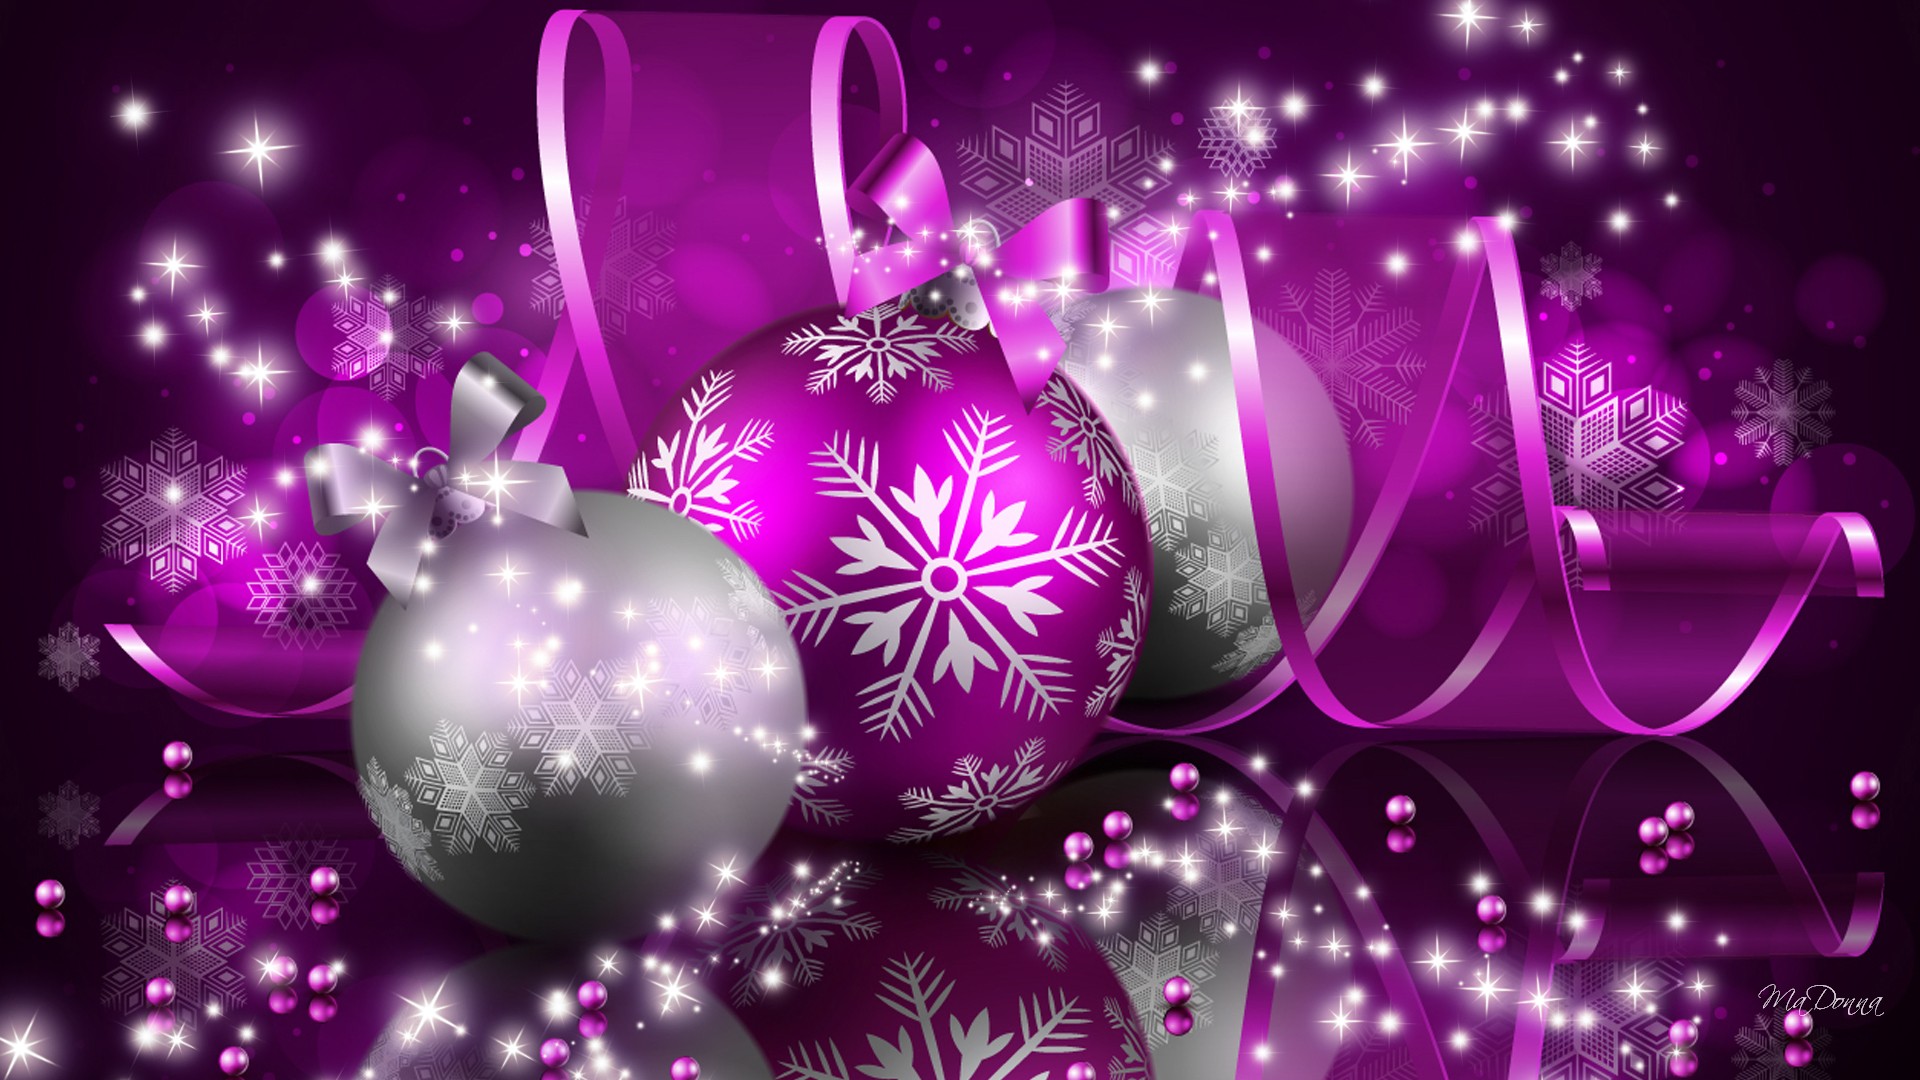 Christmas Wallpapers Backgrounds #7026533